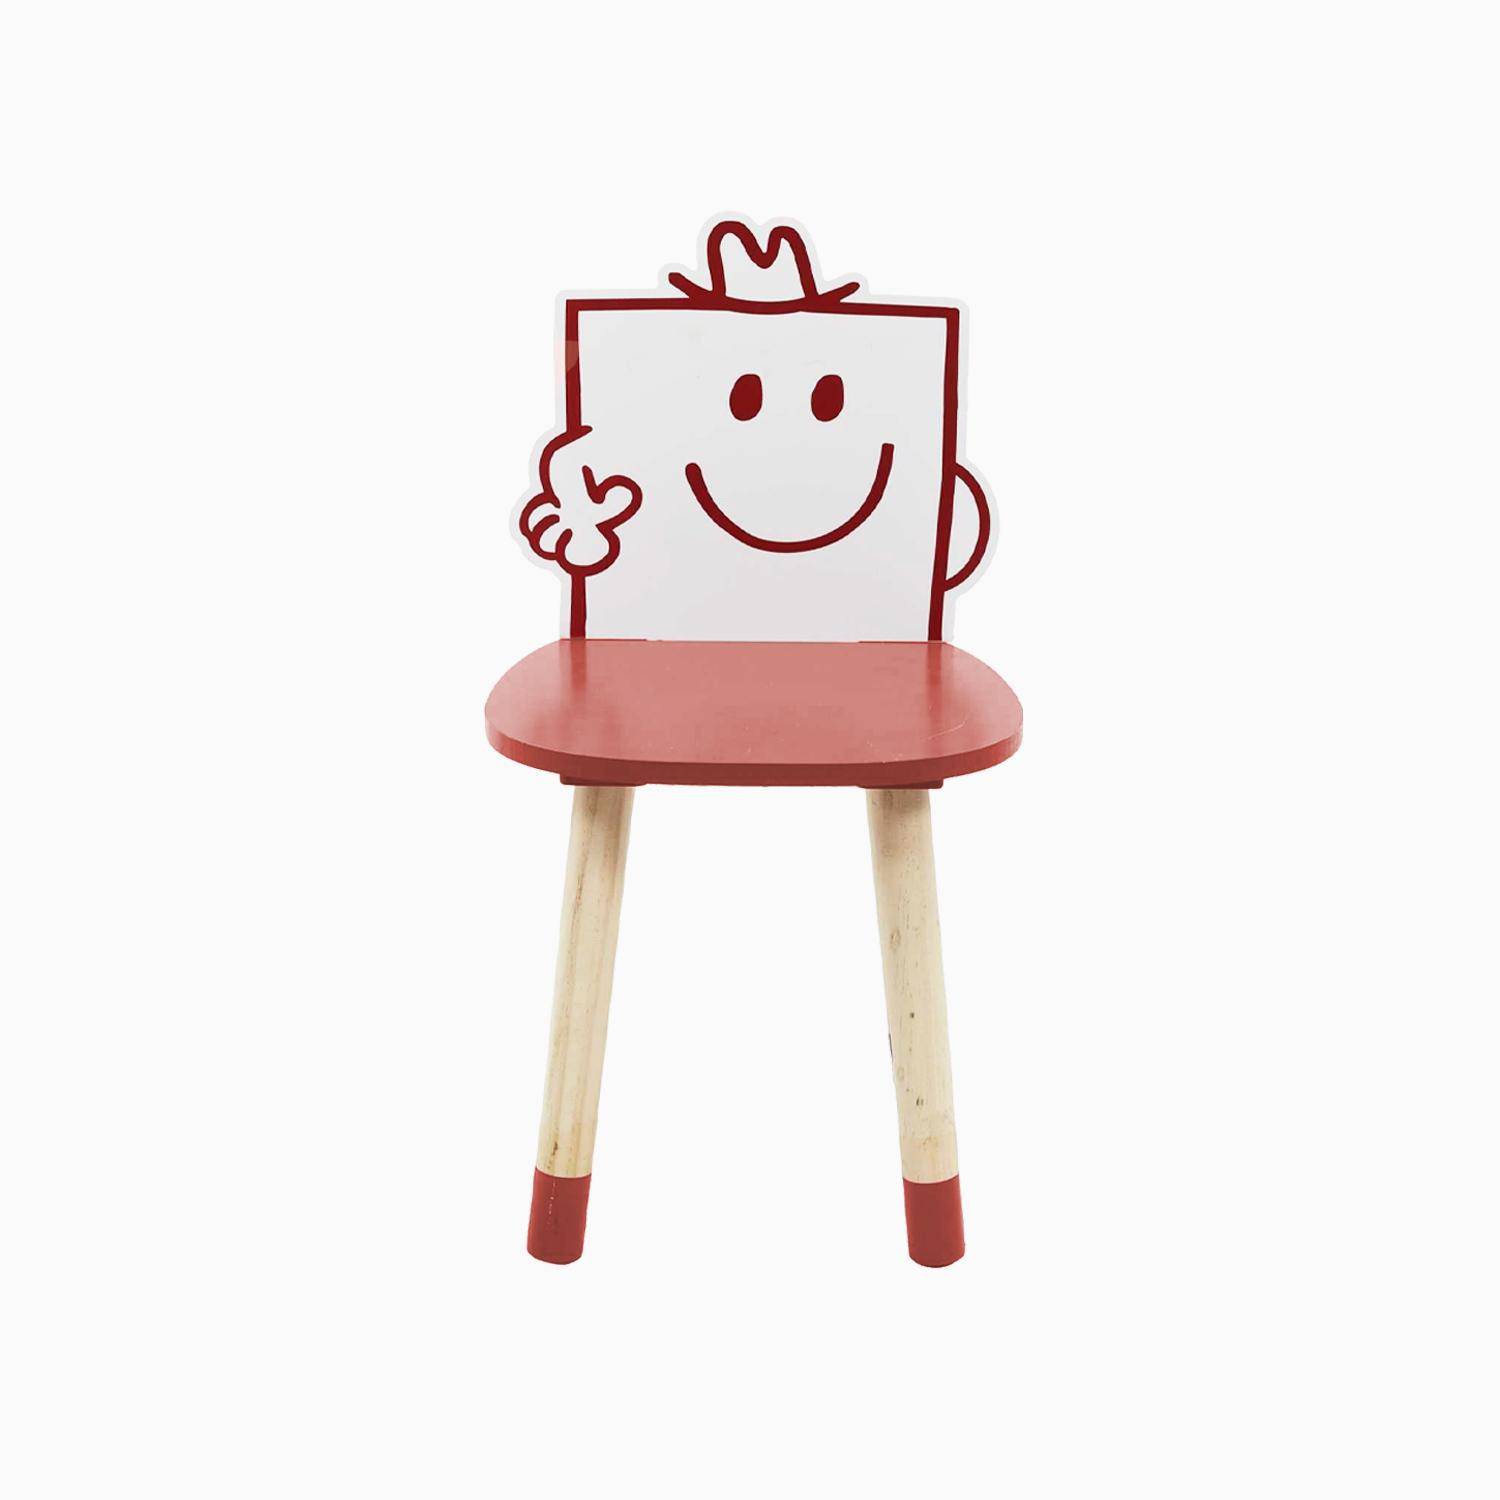 Set of 2 children's chairs, Mr. Men & Little Miss collection - Mr. Strong , Pierre, red,sweeek,Photo5